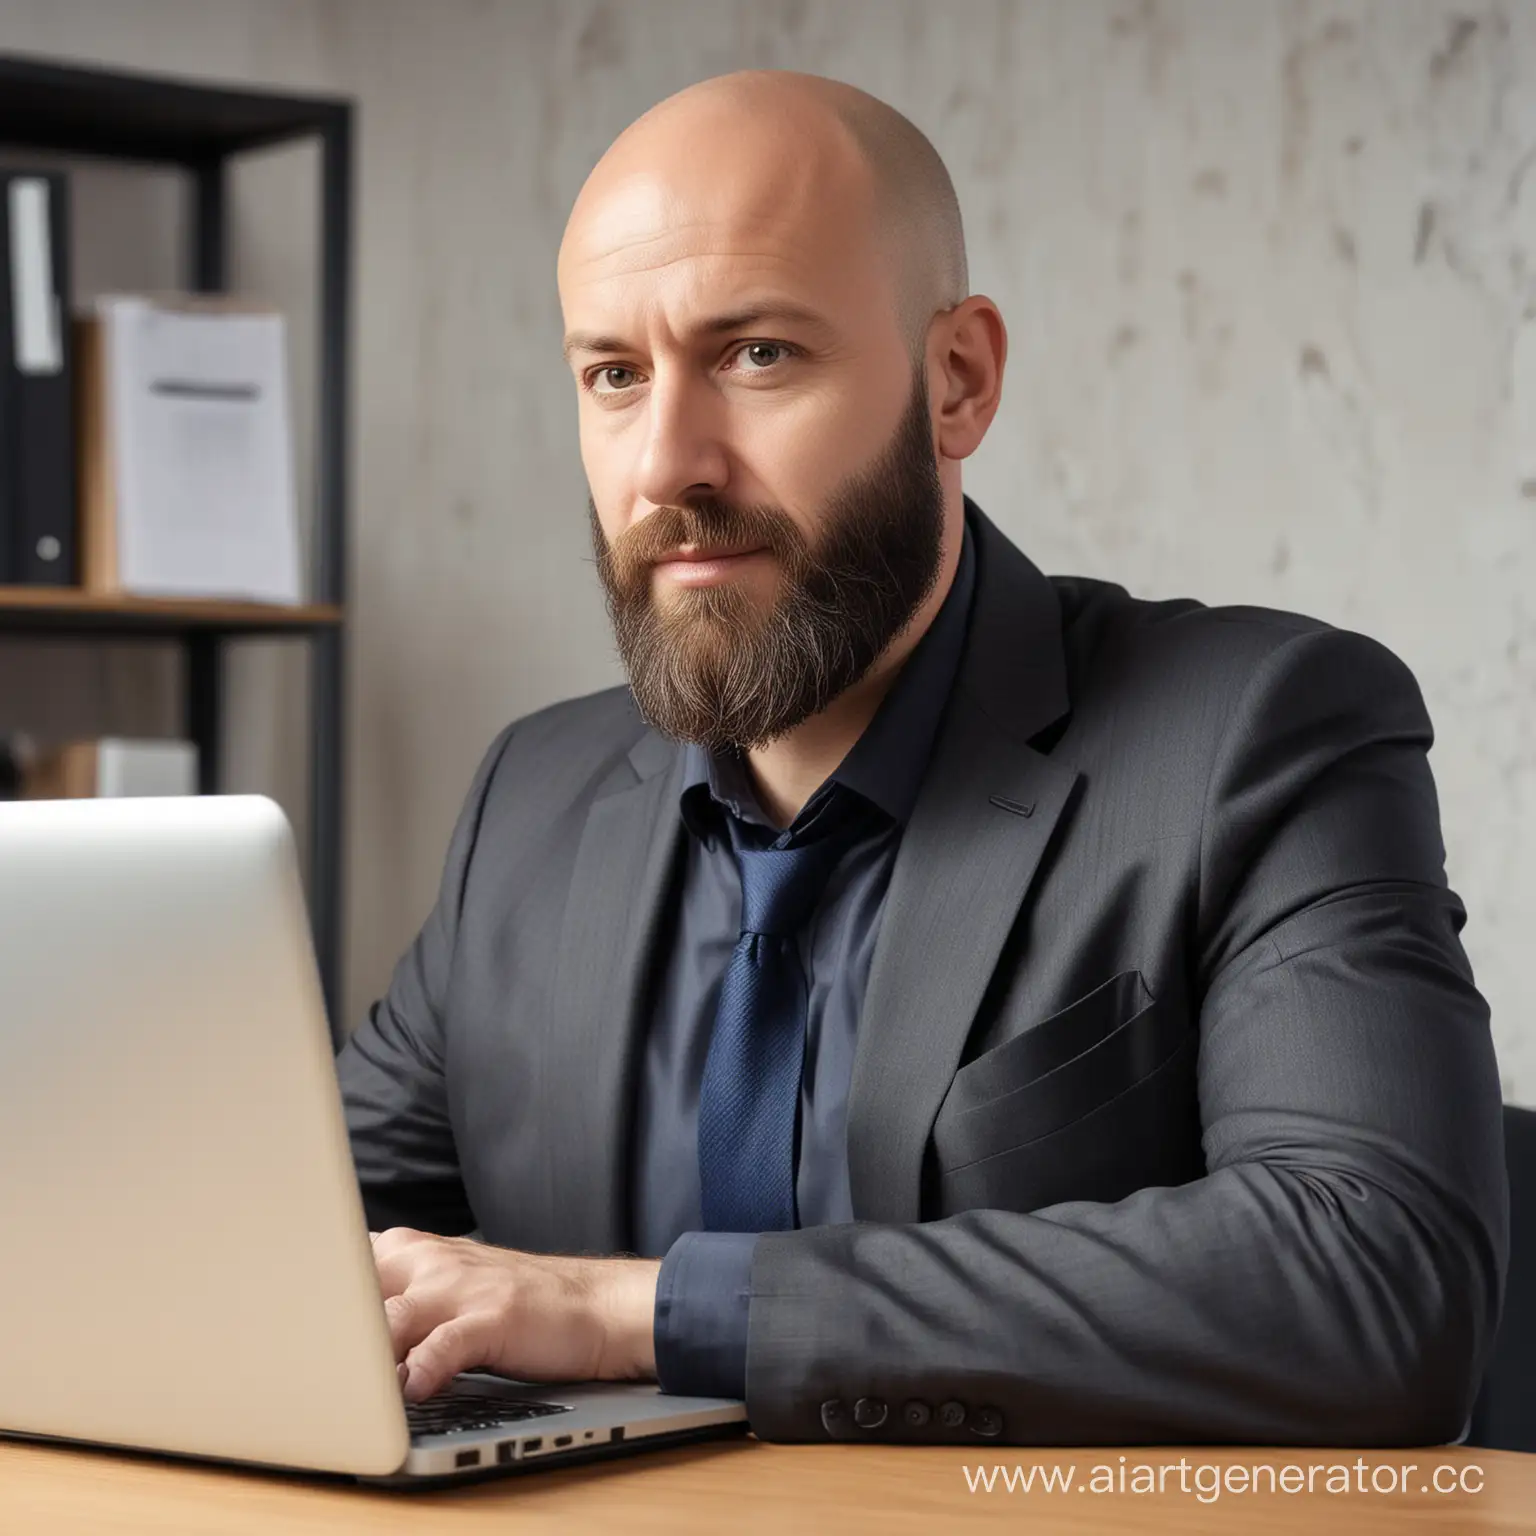 Mature-Bearded-Man-Working-on-Laptop-in-Office-Setting